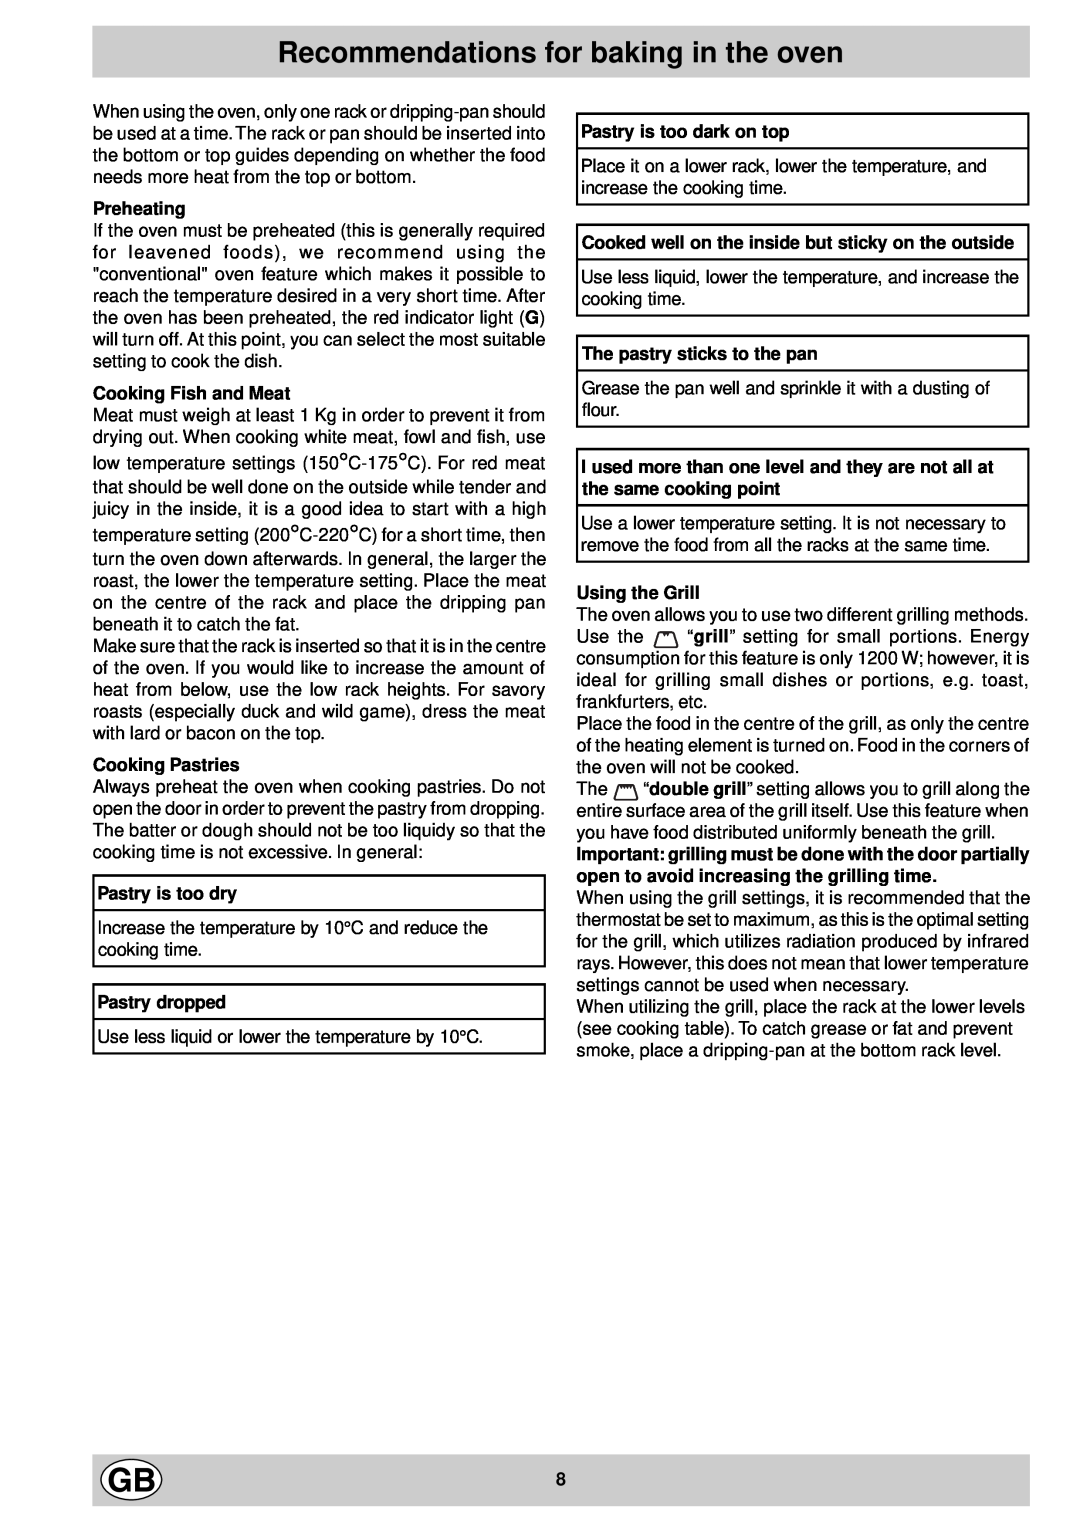 Indesit FE 10 K GB manual Recommendations for baking in the oven, Preheating, Cooking Fish and Meat, Cooking Pastries 